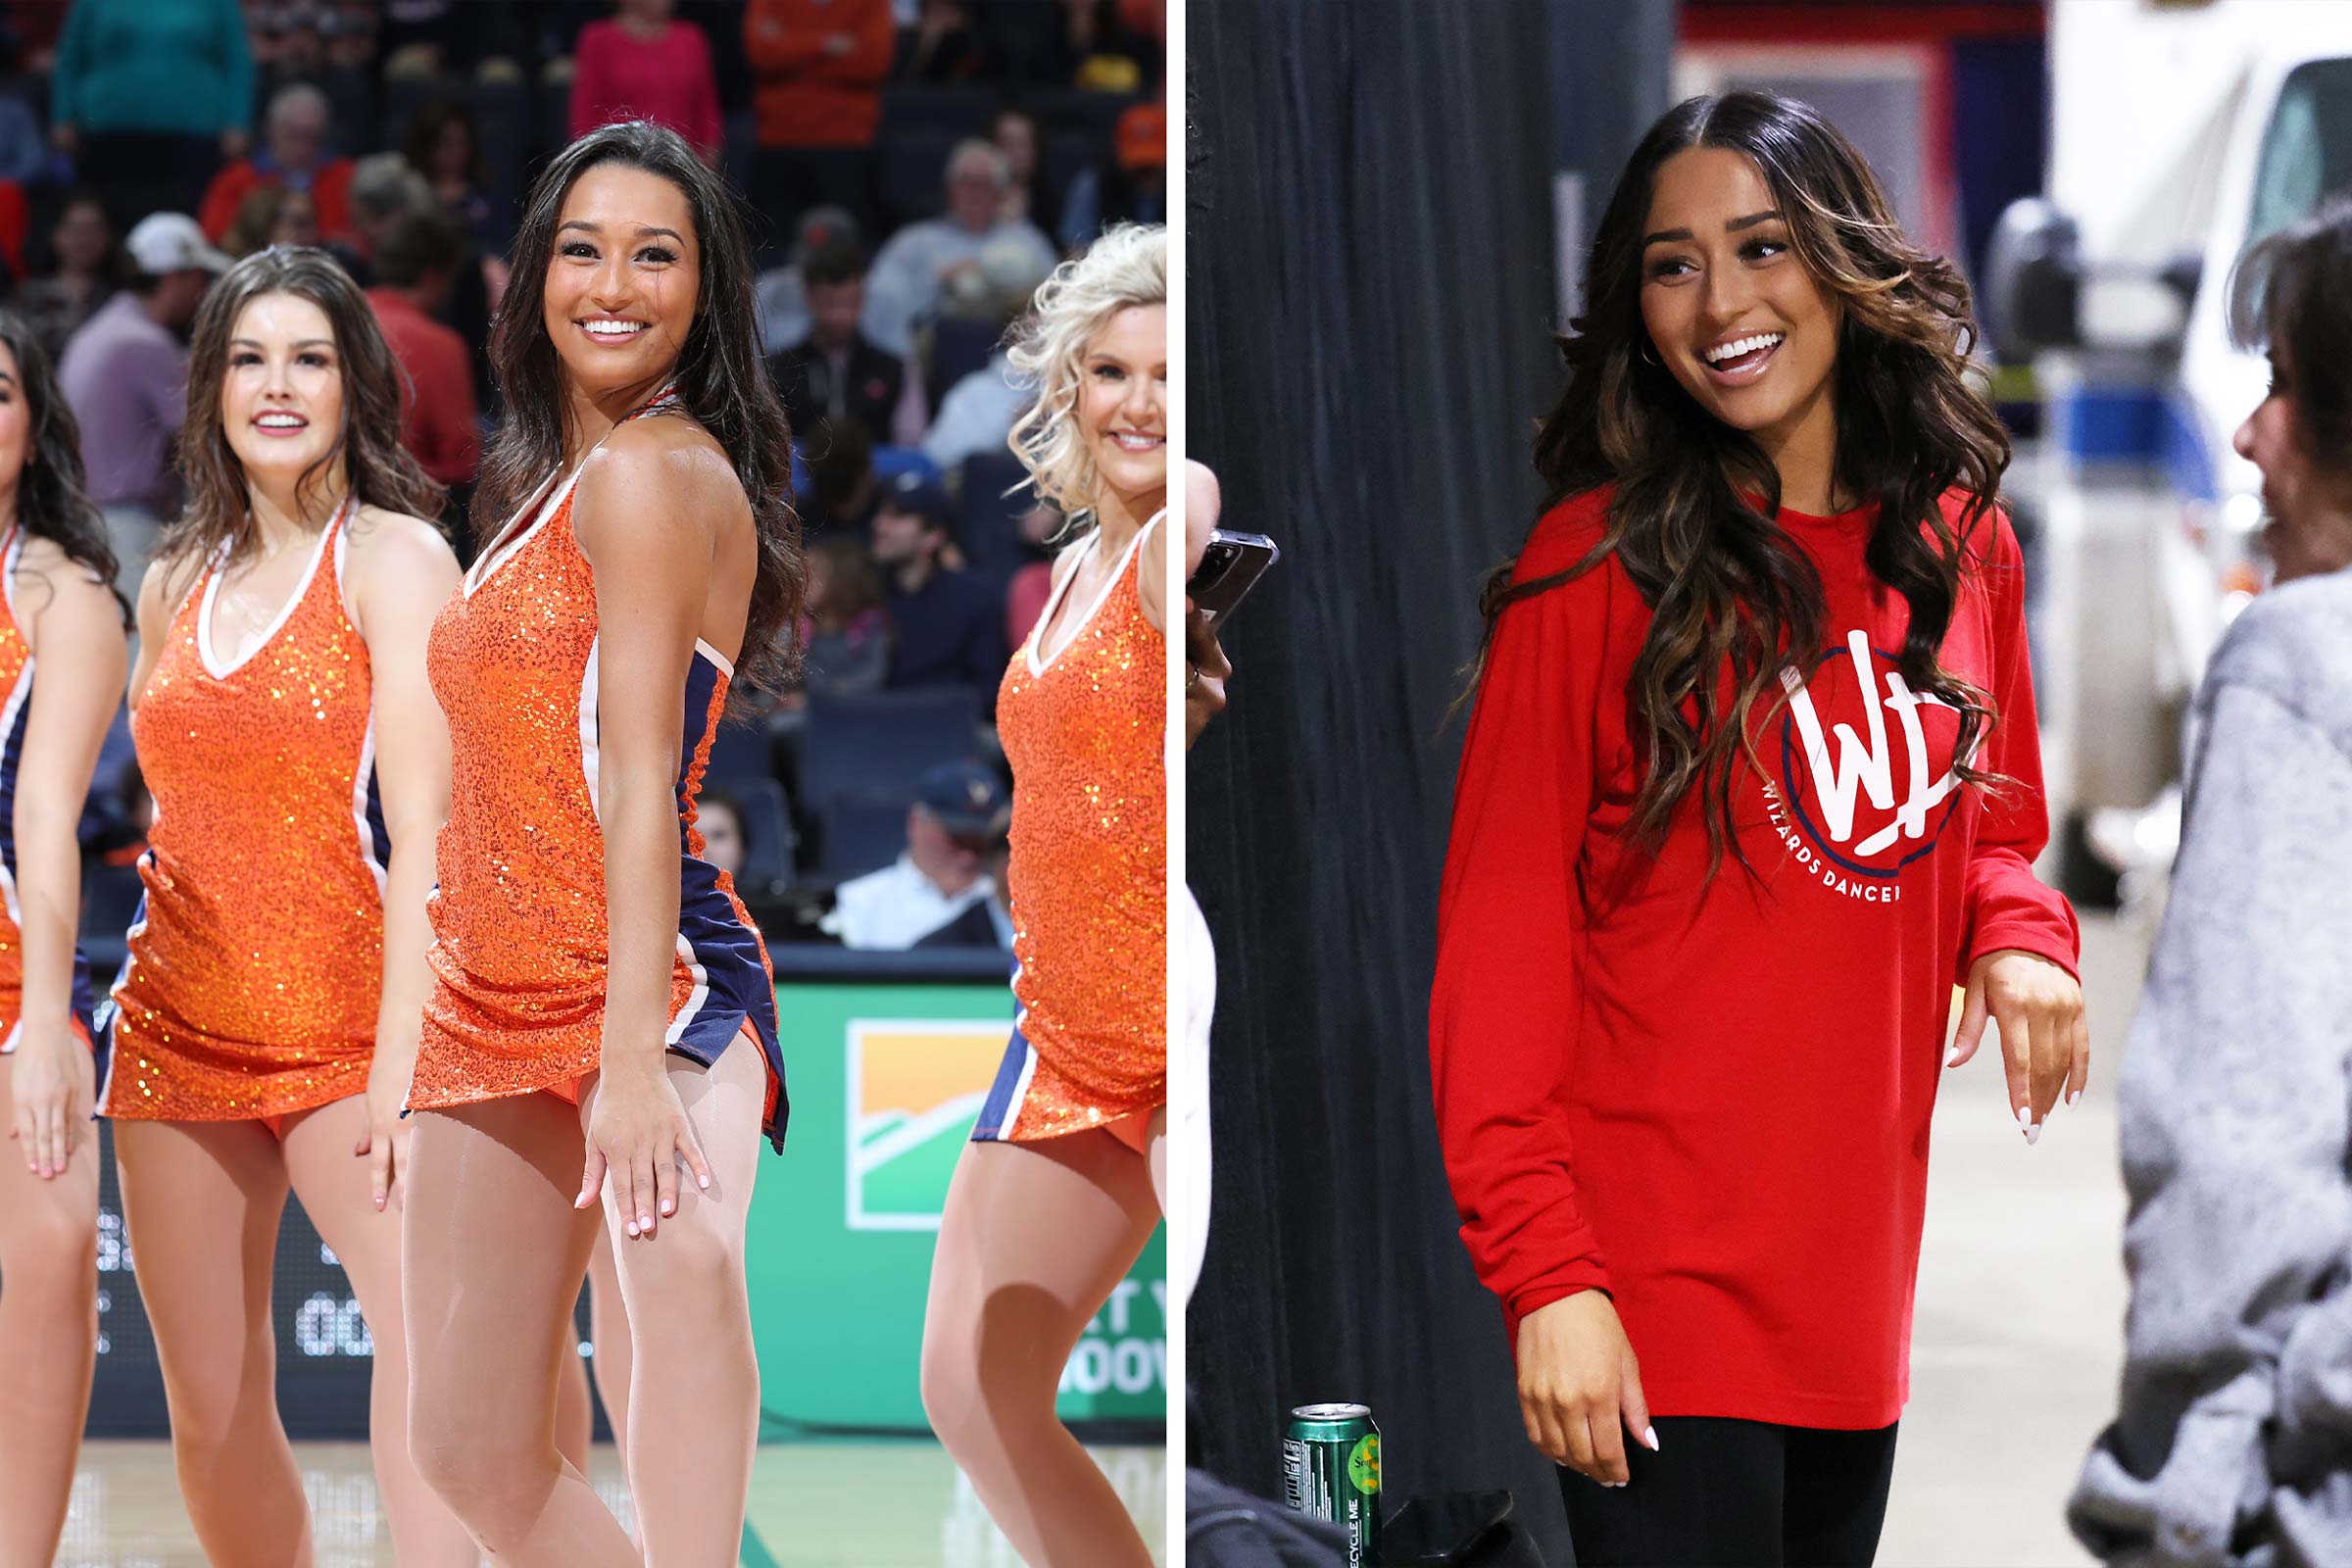 Rollins in dance gear for UVA on the left and dance gear for the Nationals on the right